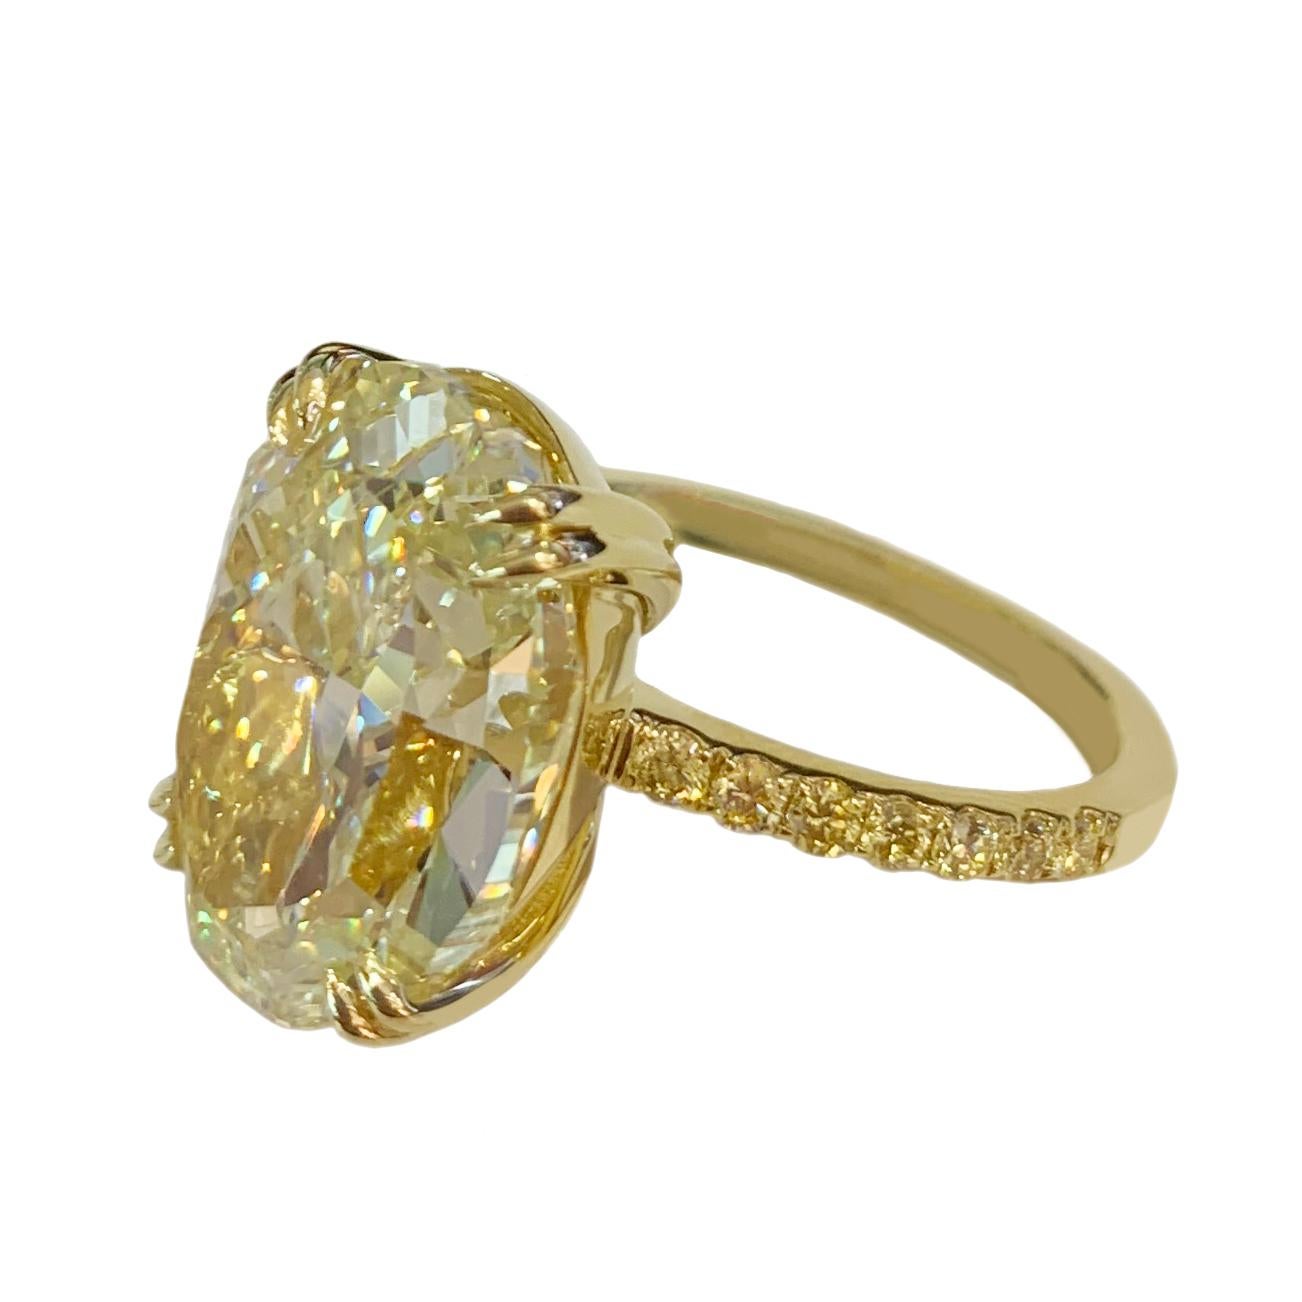 -14k Yellow Gold 
-Ring size: 6.5
-Oval diamond: 10.02ct
-Oval dimension: 11.7x15.5mm
-Color grade: Y to Z Range 
-Clarity: SI1
-Polish: Very Good 
-Comes with GIA report 